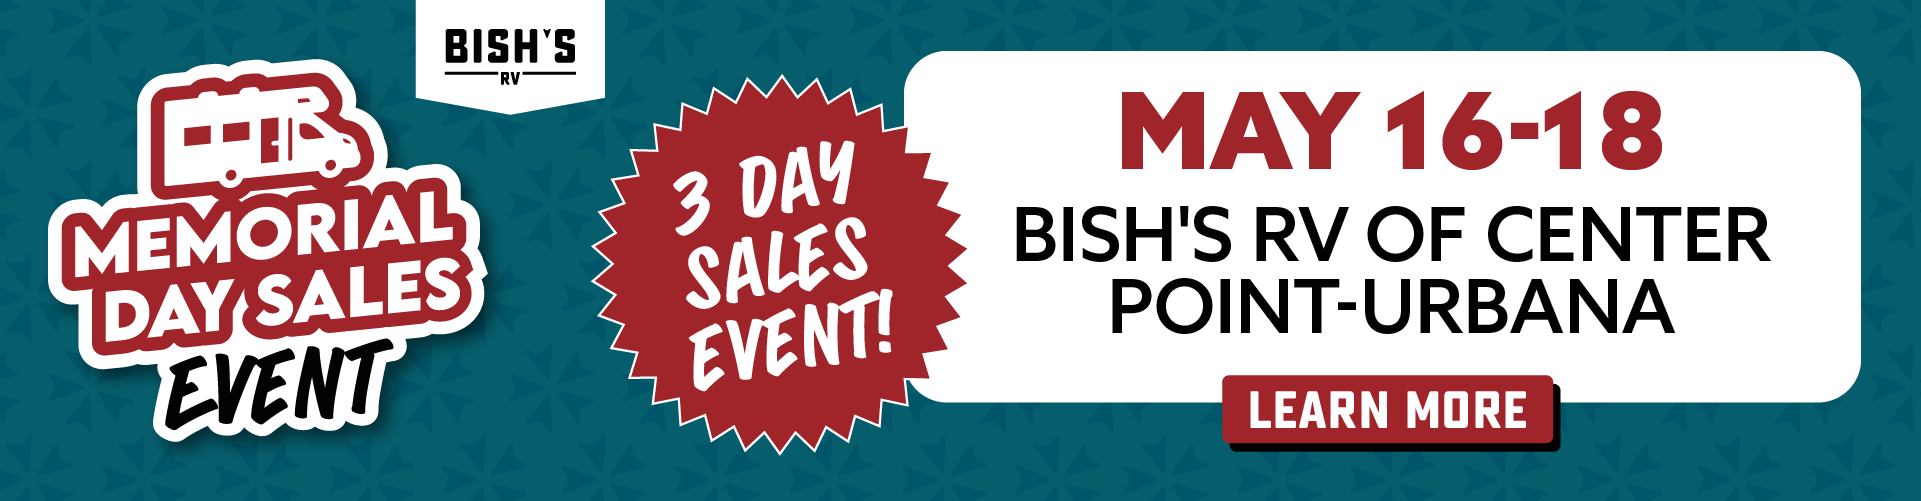 Memorial Day Sales Event - May 16-18, 2024 - Bish's RV of Center Point-Urbana, IA